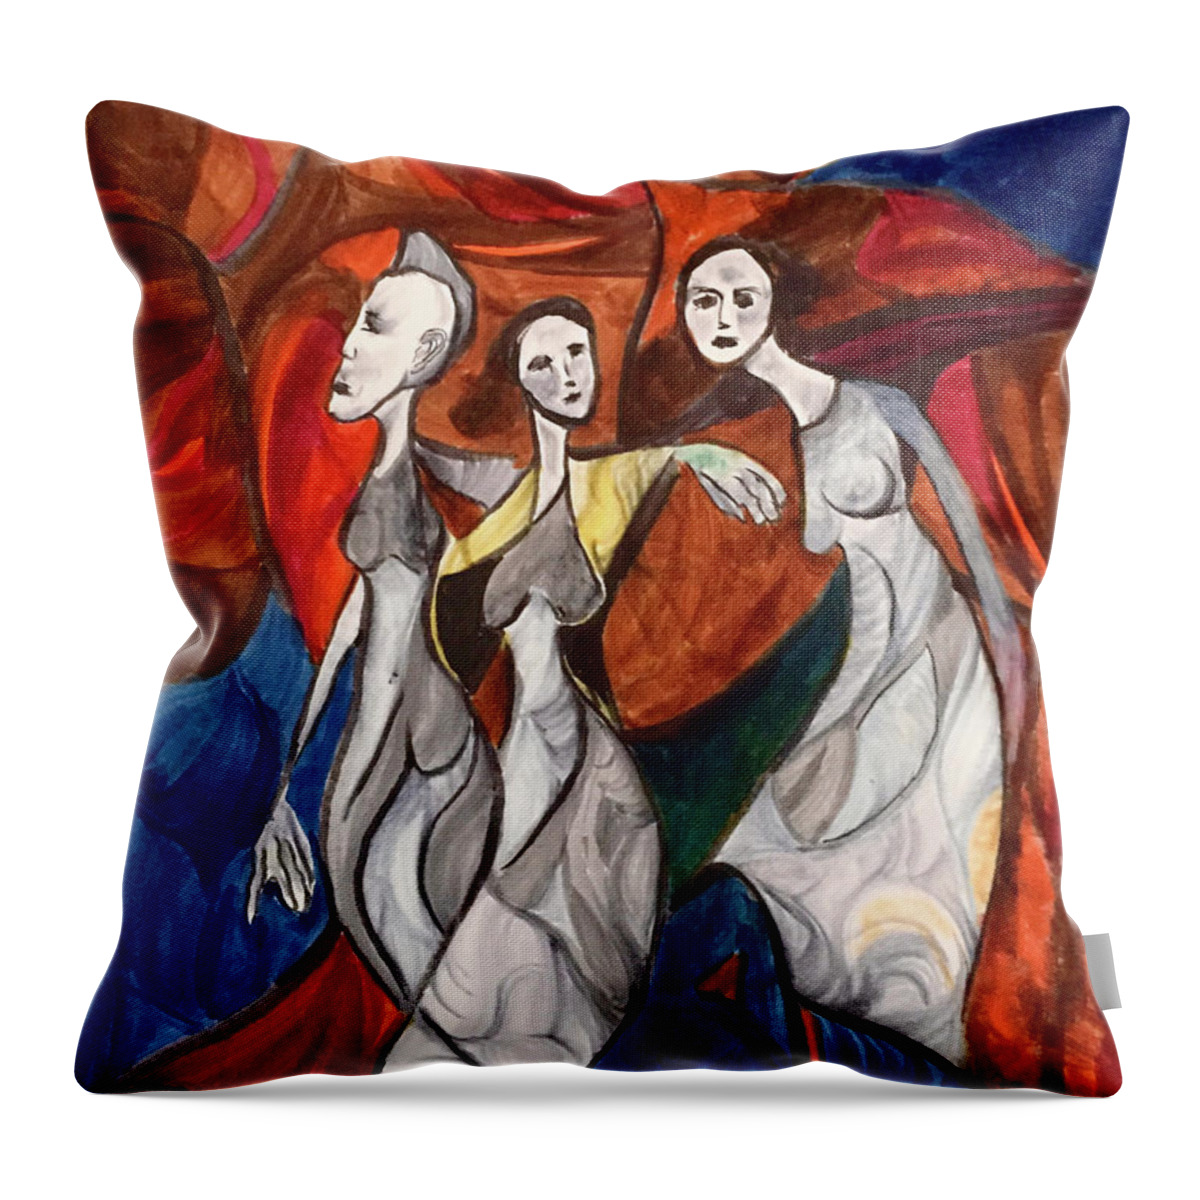 Contemporary Throw Pillow featuring the drawing My Muses by Dennis Ellman